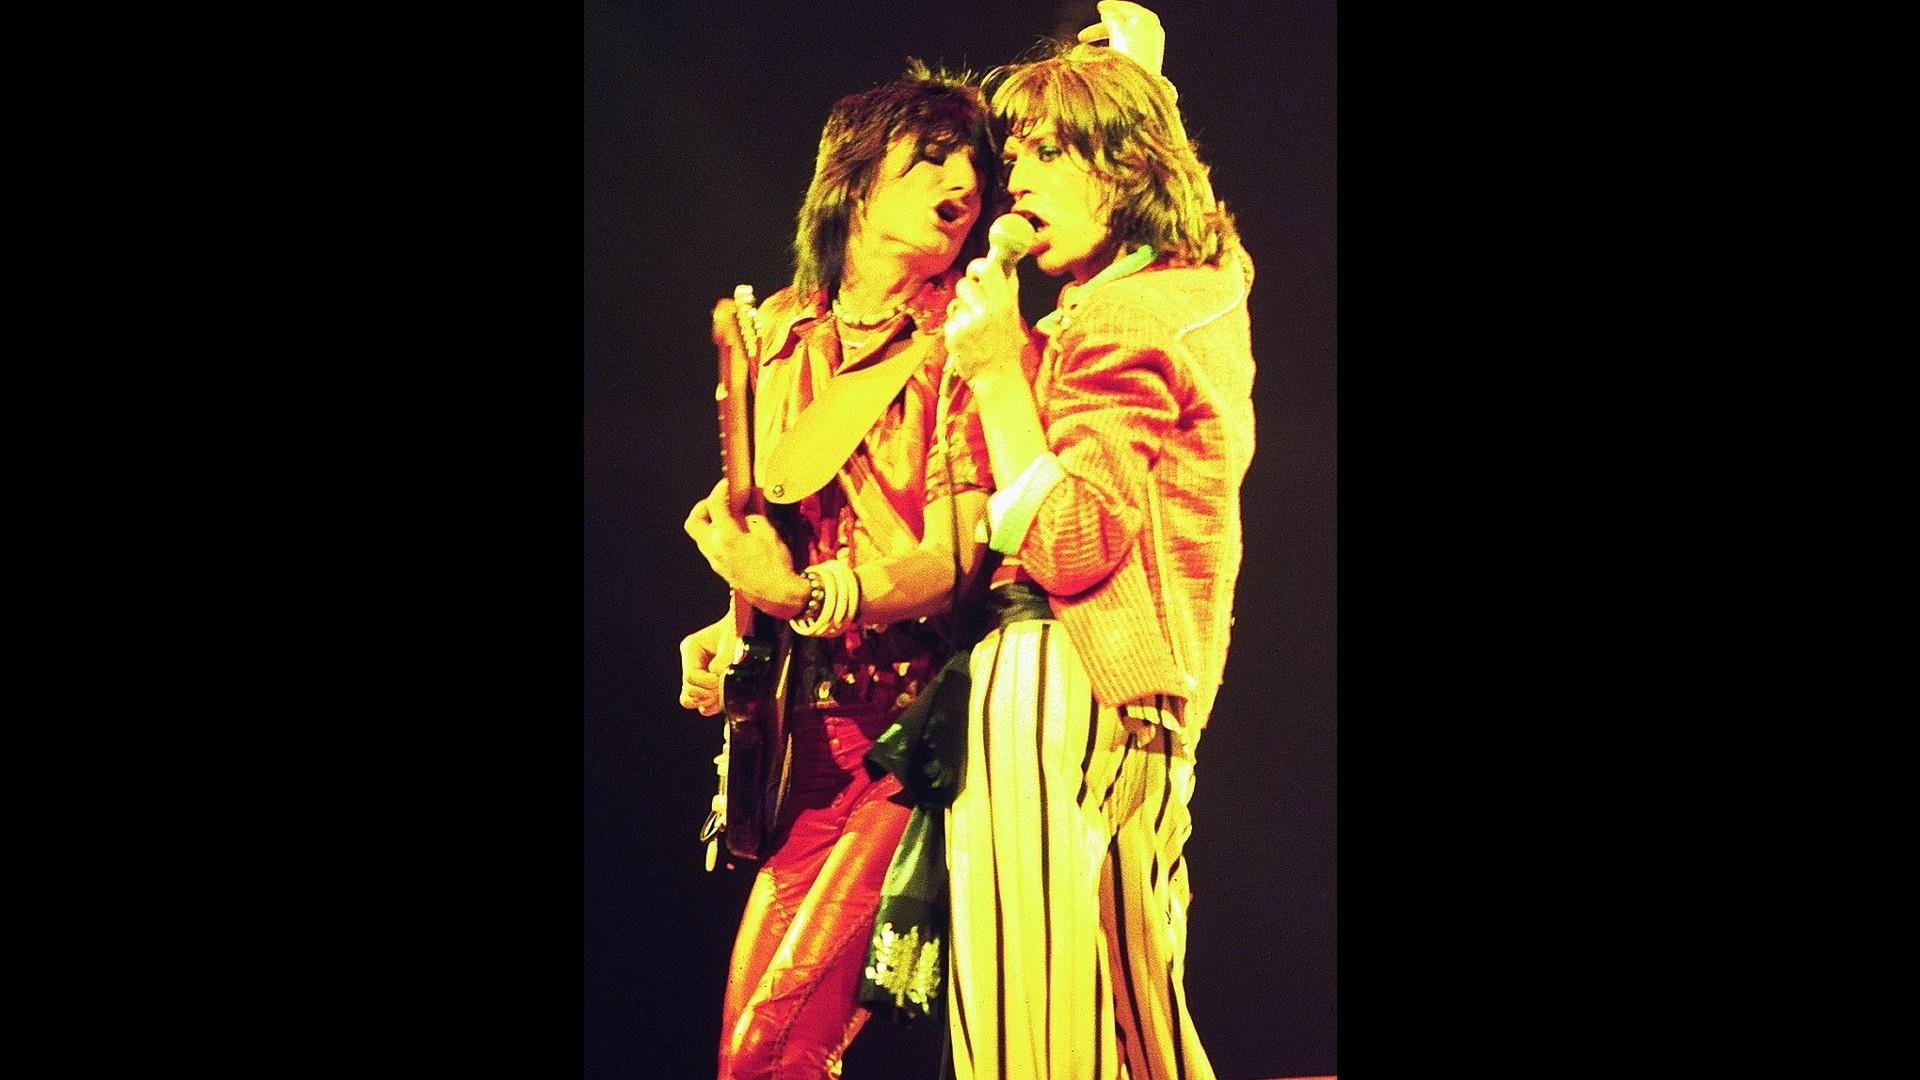 Mick Jagger, right, and Ronnie Wood of The Rolling Stones perform in Chicago in 1975. (Credit: Jim Summaria)